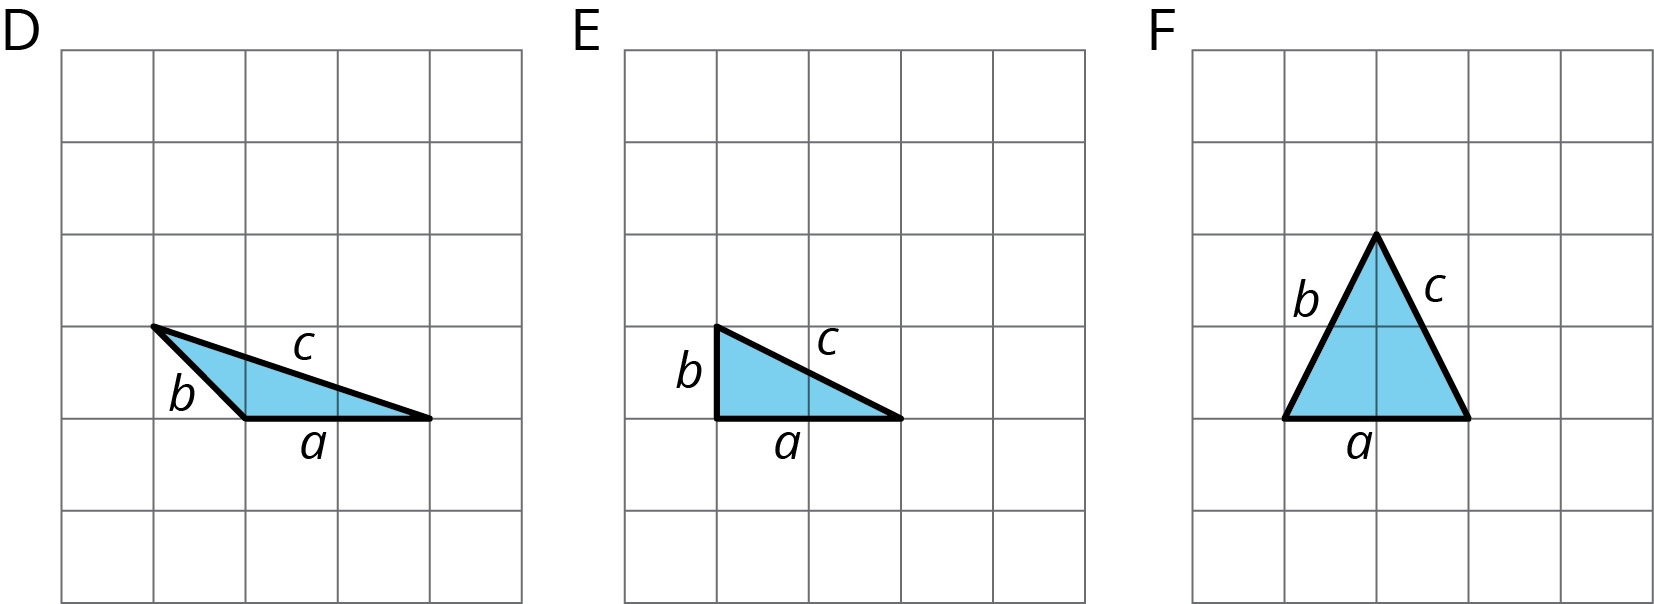 Three triangles on a square grid labeled “D,” “E,” and “F” with sides a, b, and c. The triangles have the following measurements: Triangle D: Horizontal side a is 2 units. Side b slants upward and to the left. Side c slants downward and to the right. The height of the triangle is 1.   Triangle E: Horizontal side a is 2 units. Vertical side b is 1 unit. Diagonal side c slants downward and to the right and the triangle has a height of 1 unit.    Triangle F: Horizontal side a is 2 units. Side b and side c are equal in length. The triangle has a height of 2 units.